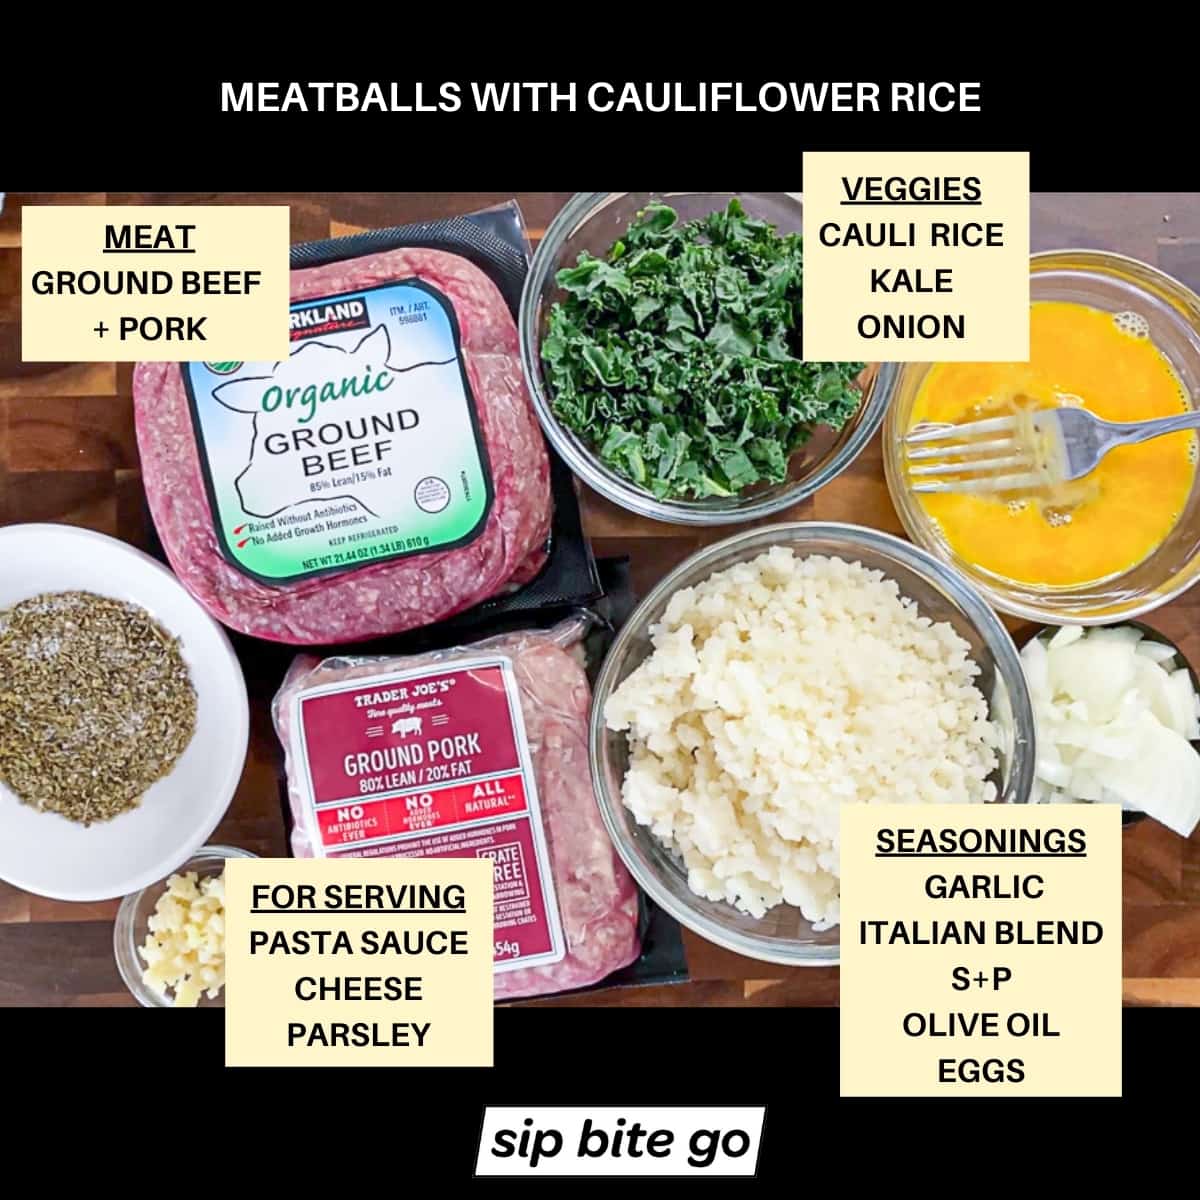 Image with text overlay of ingredients list for meatballs made with cauliflower and ground beef and pork.